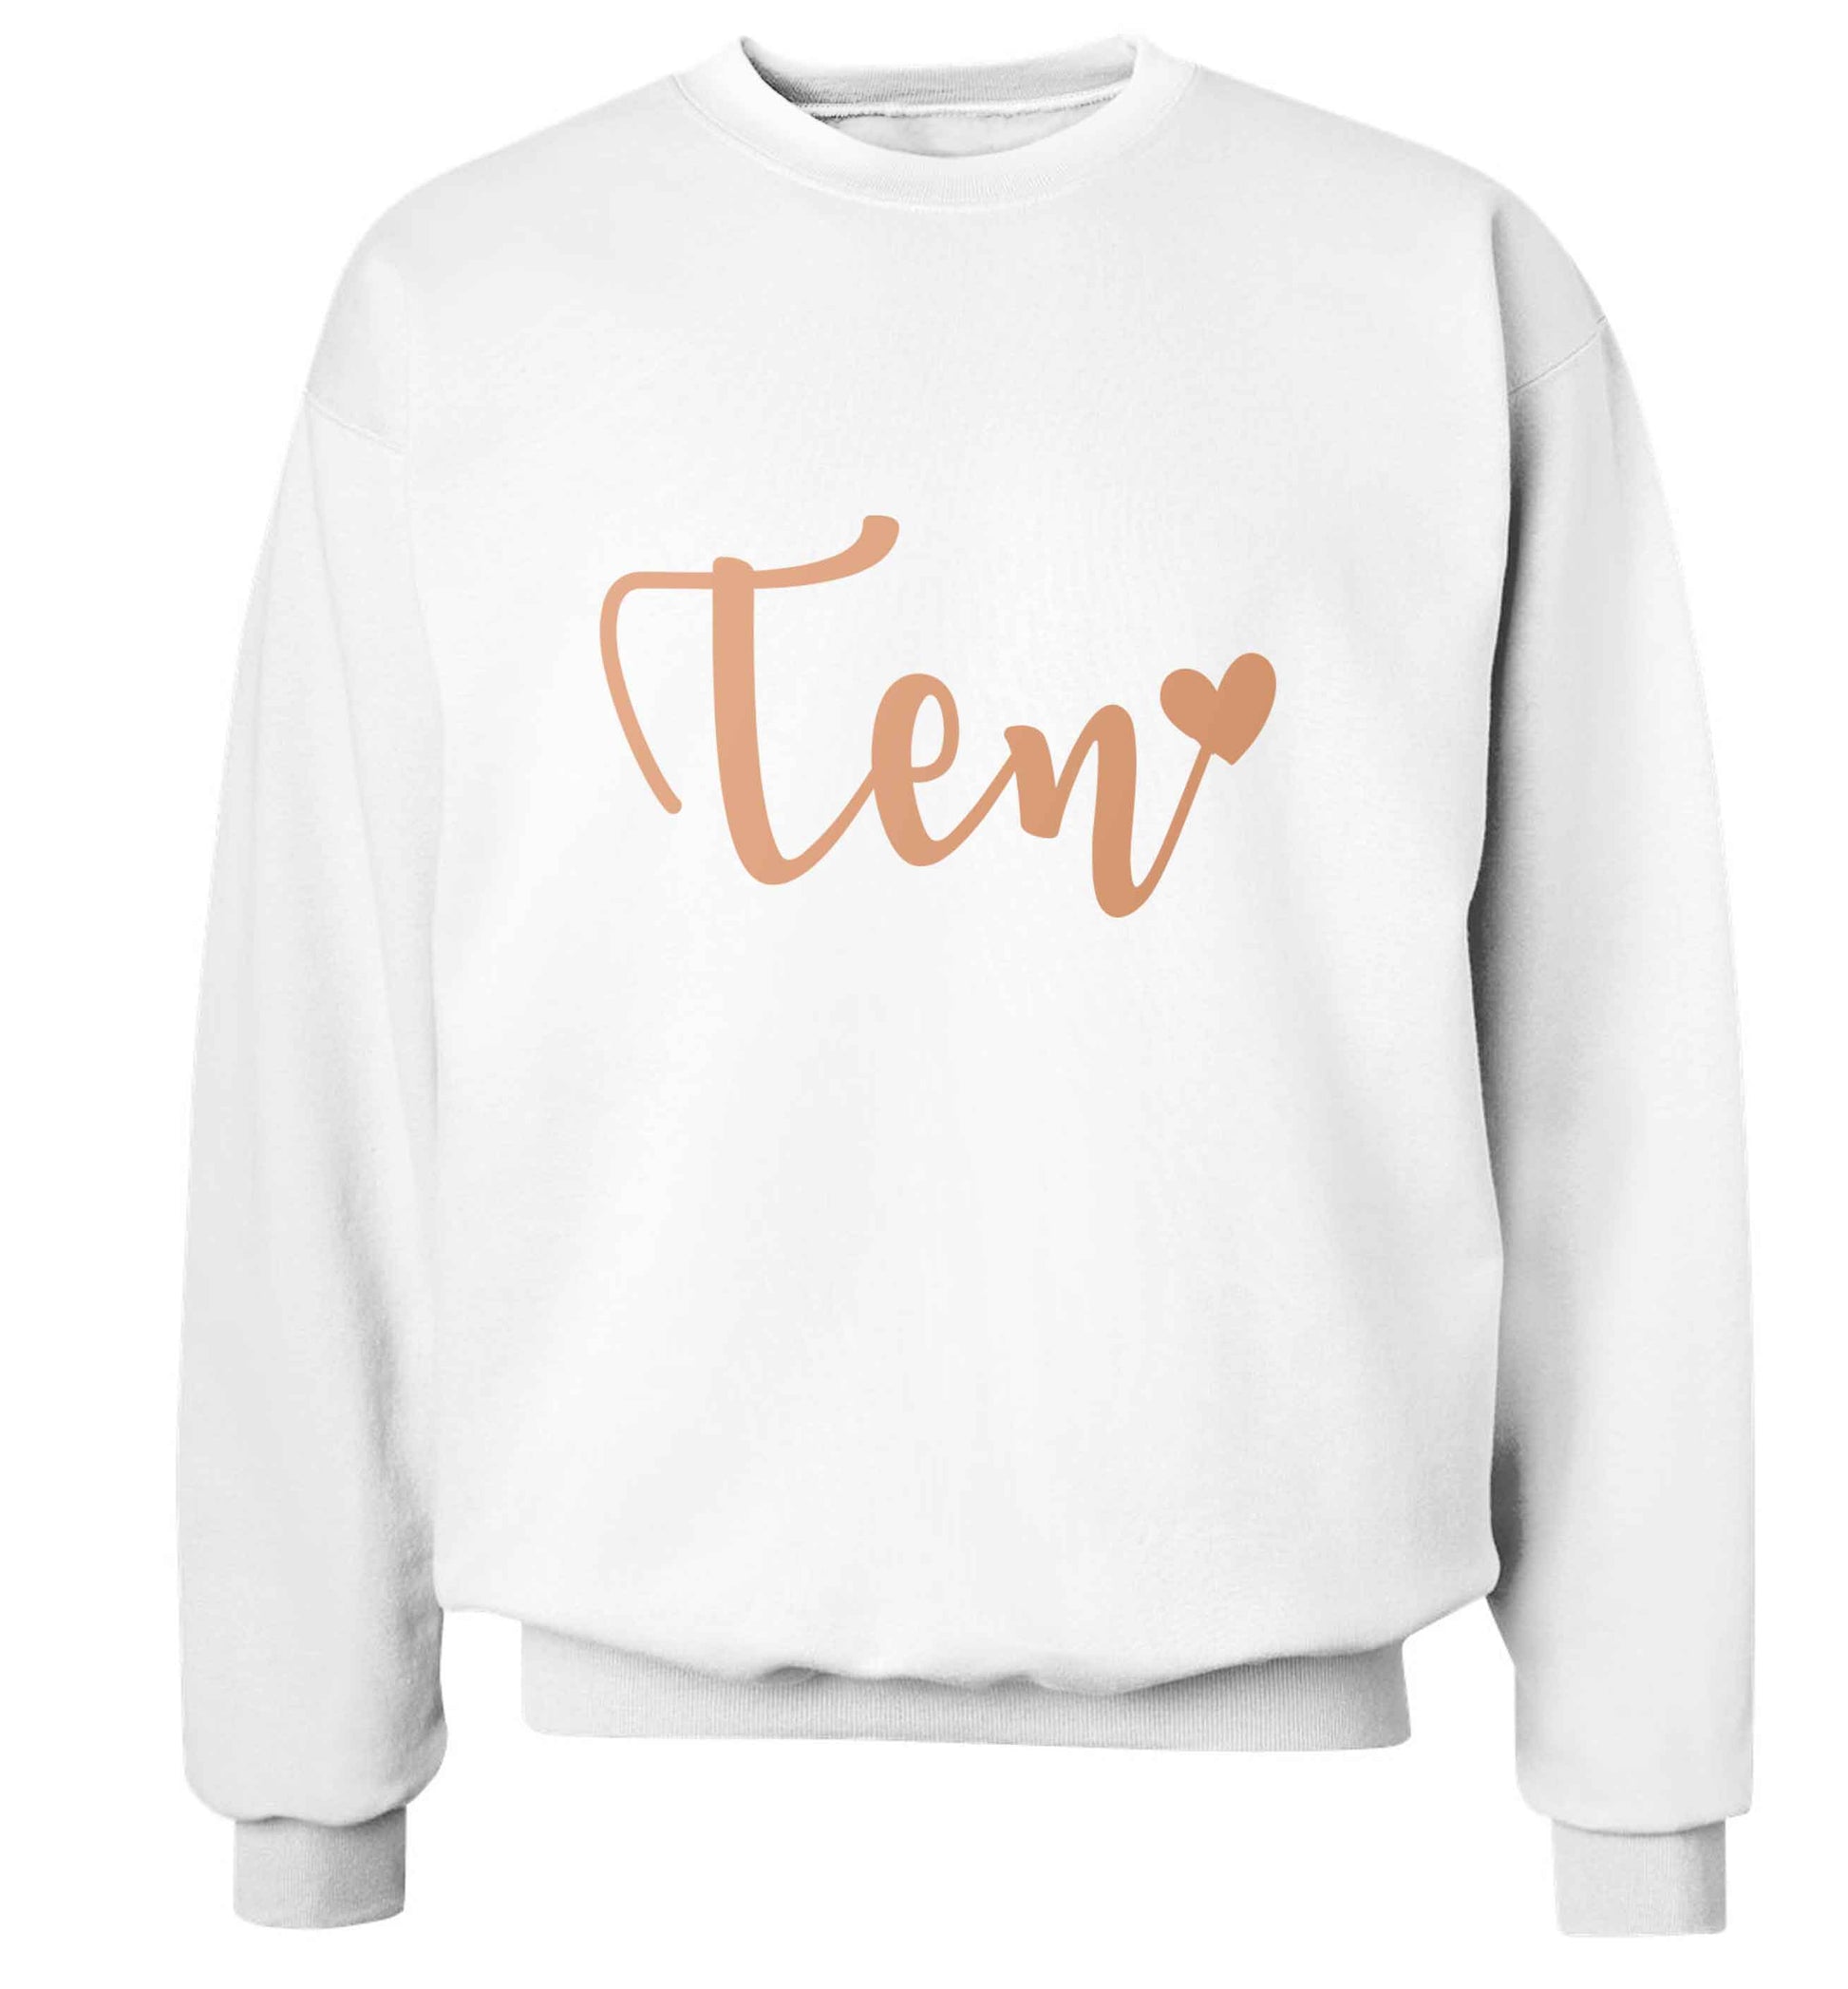 Rose gold eleven adult's unisex white sweater 2XL